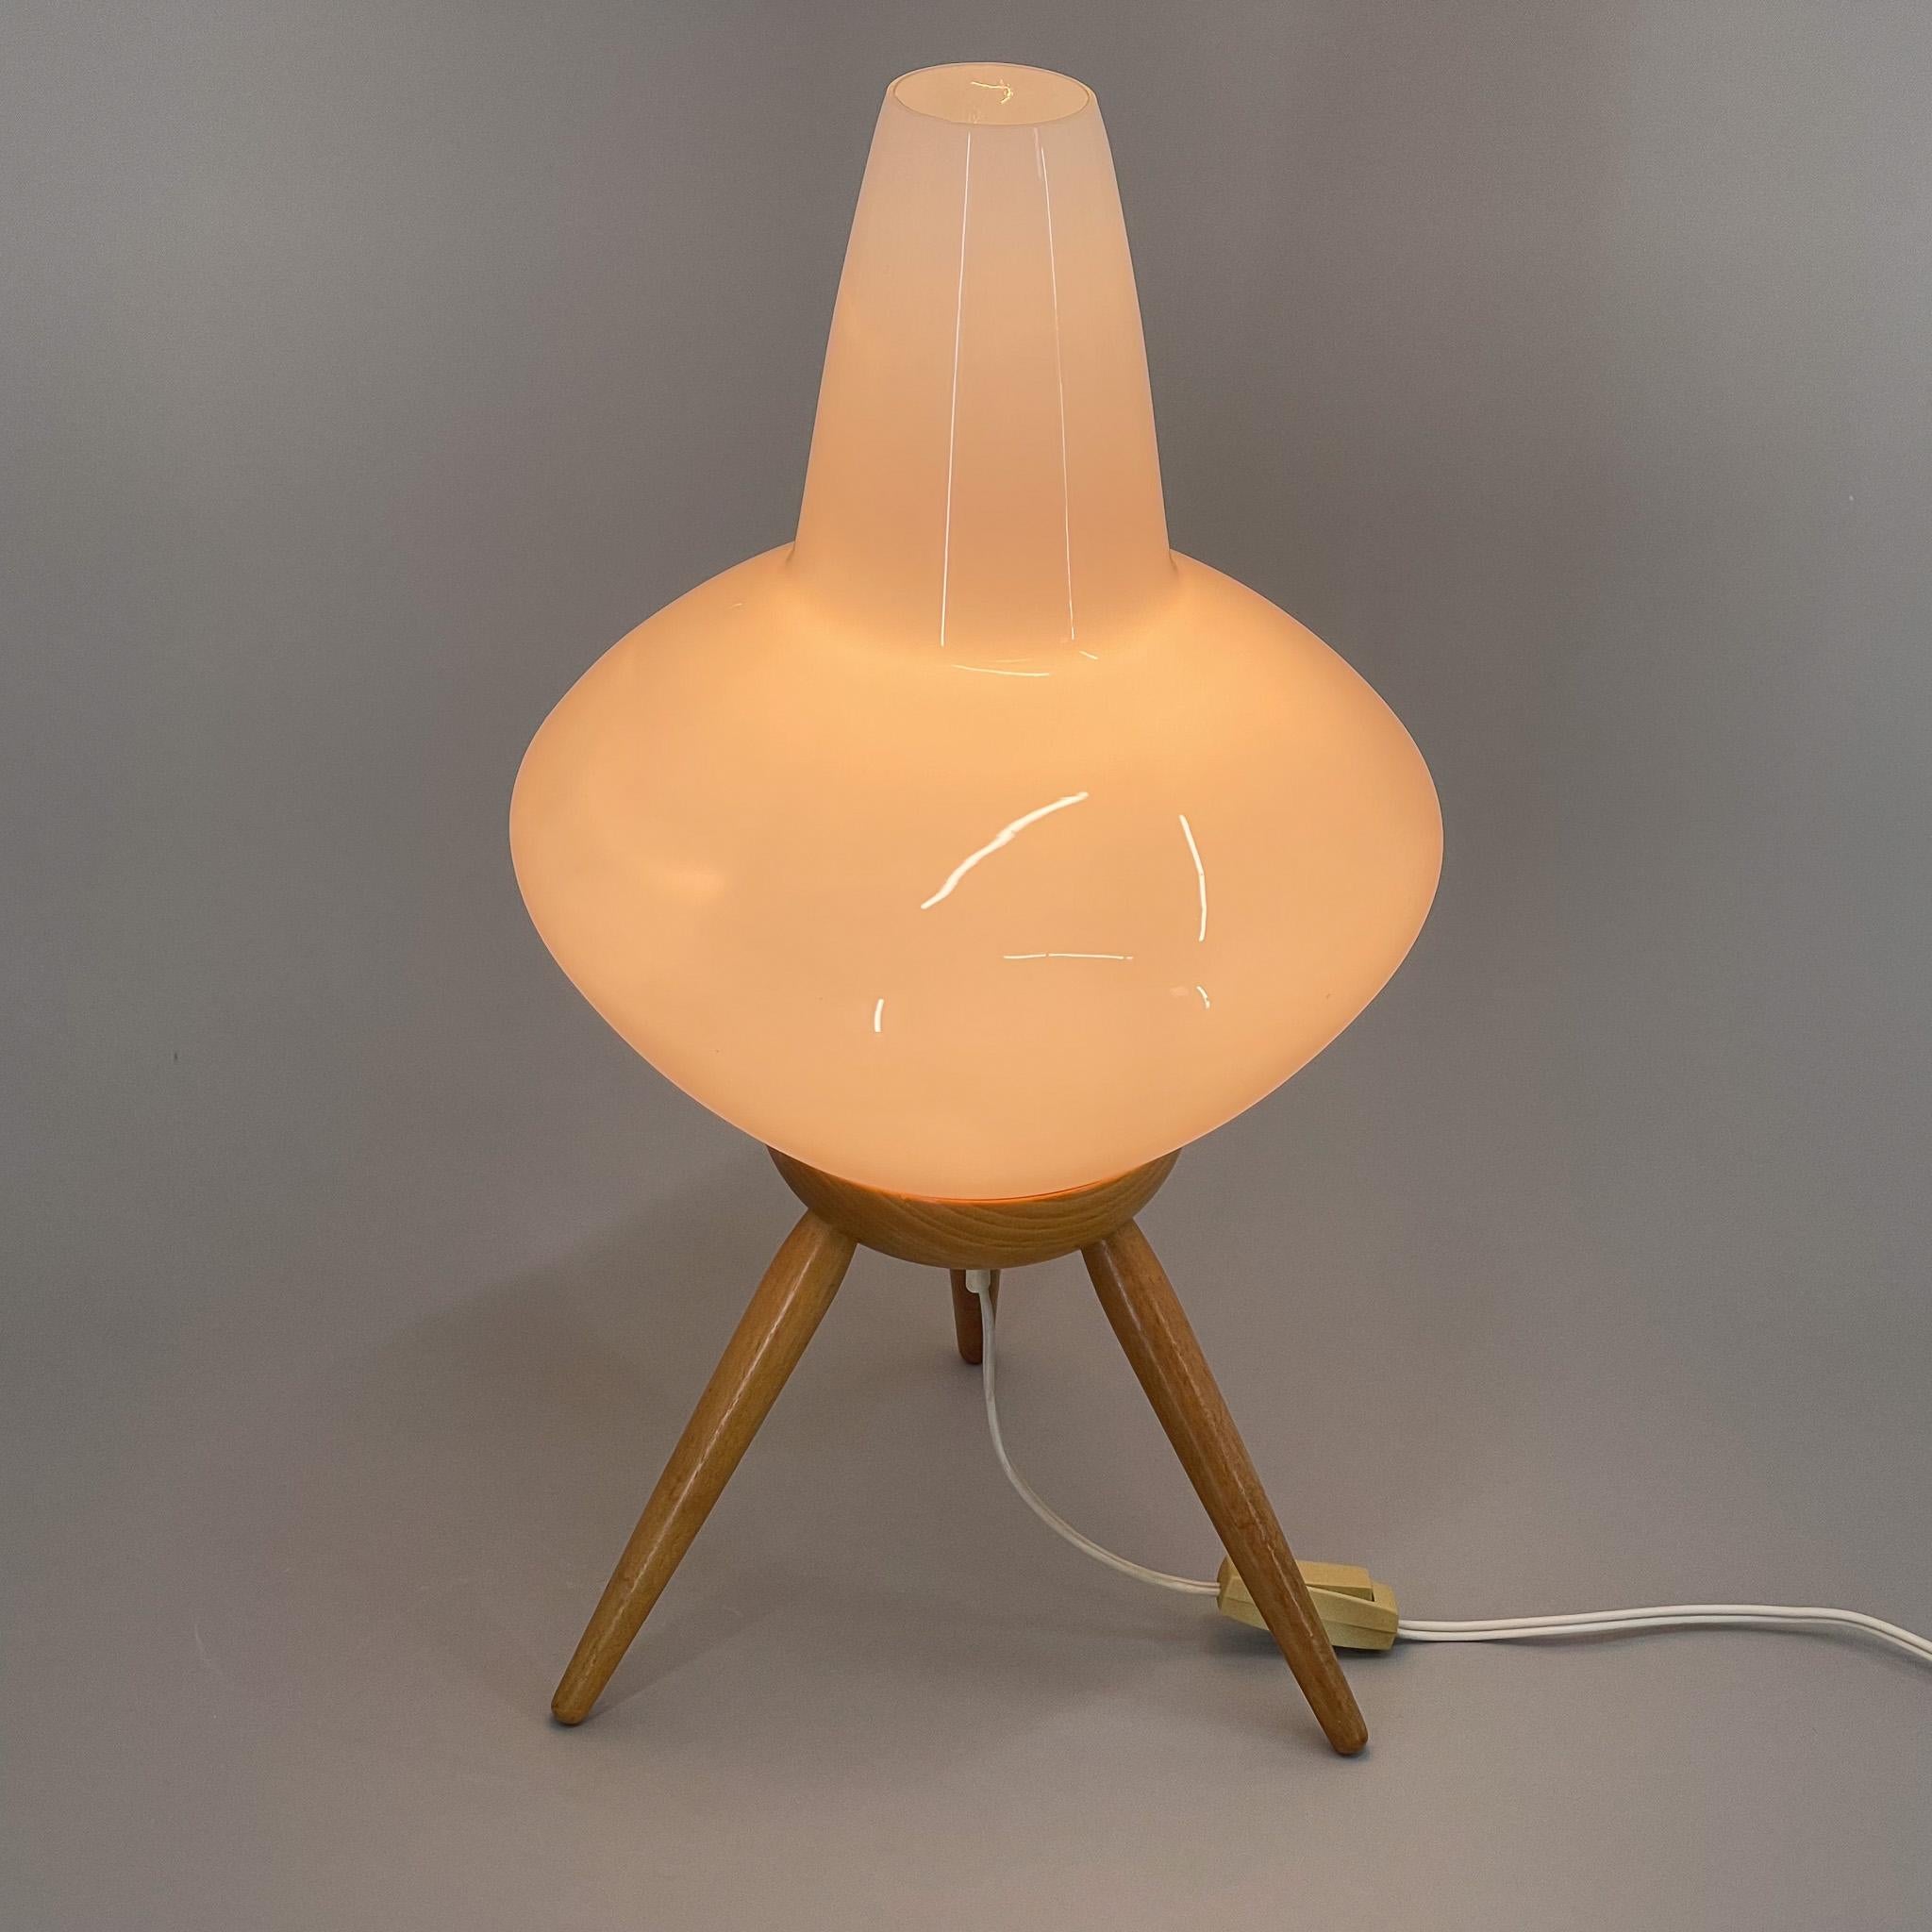 Czech Midcentury Space Age Table Lamp 